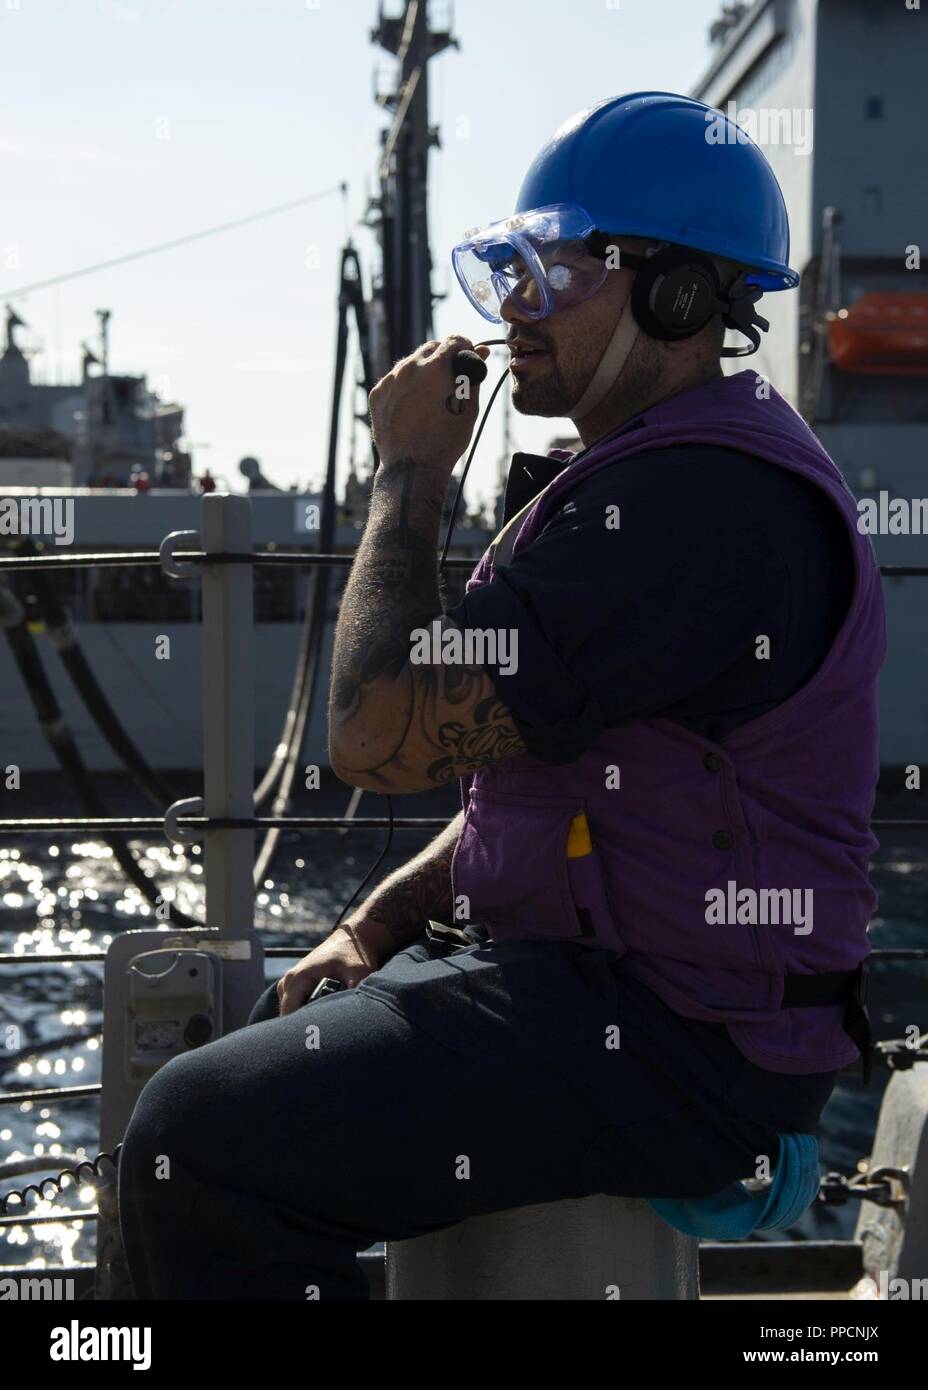 ATLANTIC OCEAN (Sep. 1, 2018) Gas Turbine Systems Technician (Mechanical) 3rd Class William Cloninger monitors refueling operations at a underway replenishment station aboard the guided-missile destroyer USS Arleigh Burke (DDG 51) during a replenishment-at-sea with the Military Sealift Command’s fleet replenishment oiler USNS John Lenthall (T-AOE 189). Arleigh Burke is currently deployed as part of the Harry S. Truman Carrier Strike Group. Harry S. Truman will continue its deployment by conducting sustainment operations in the Atlantic. Stock Photo